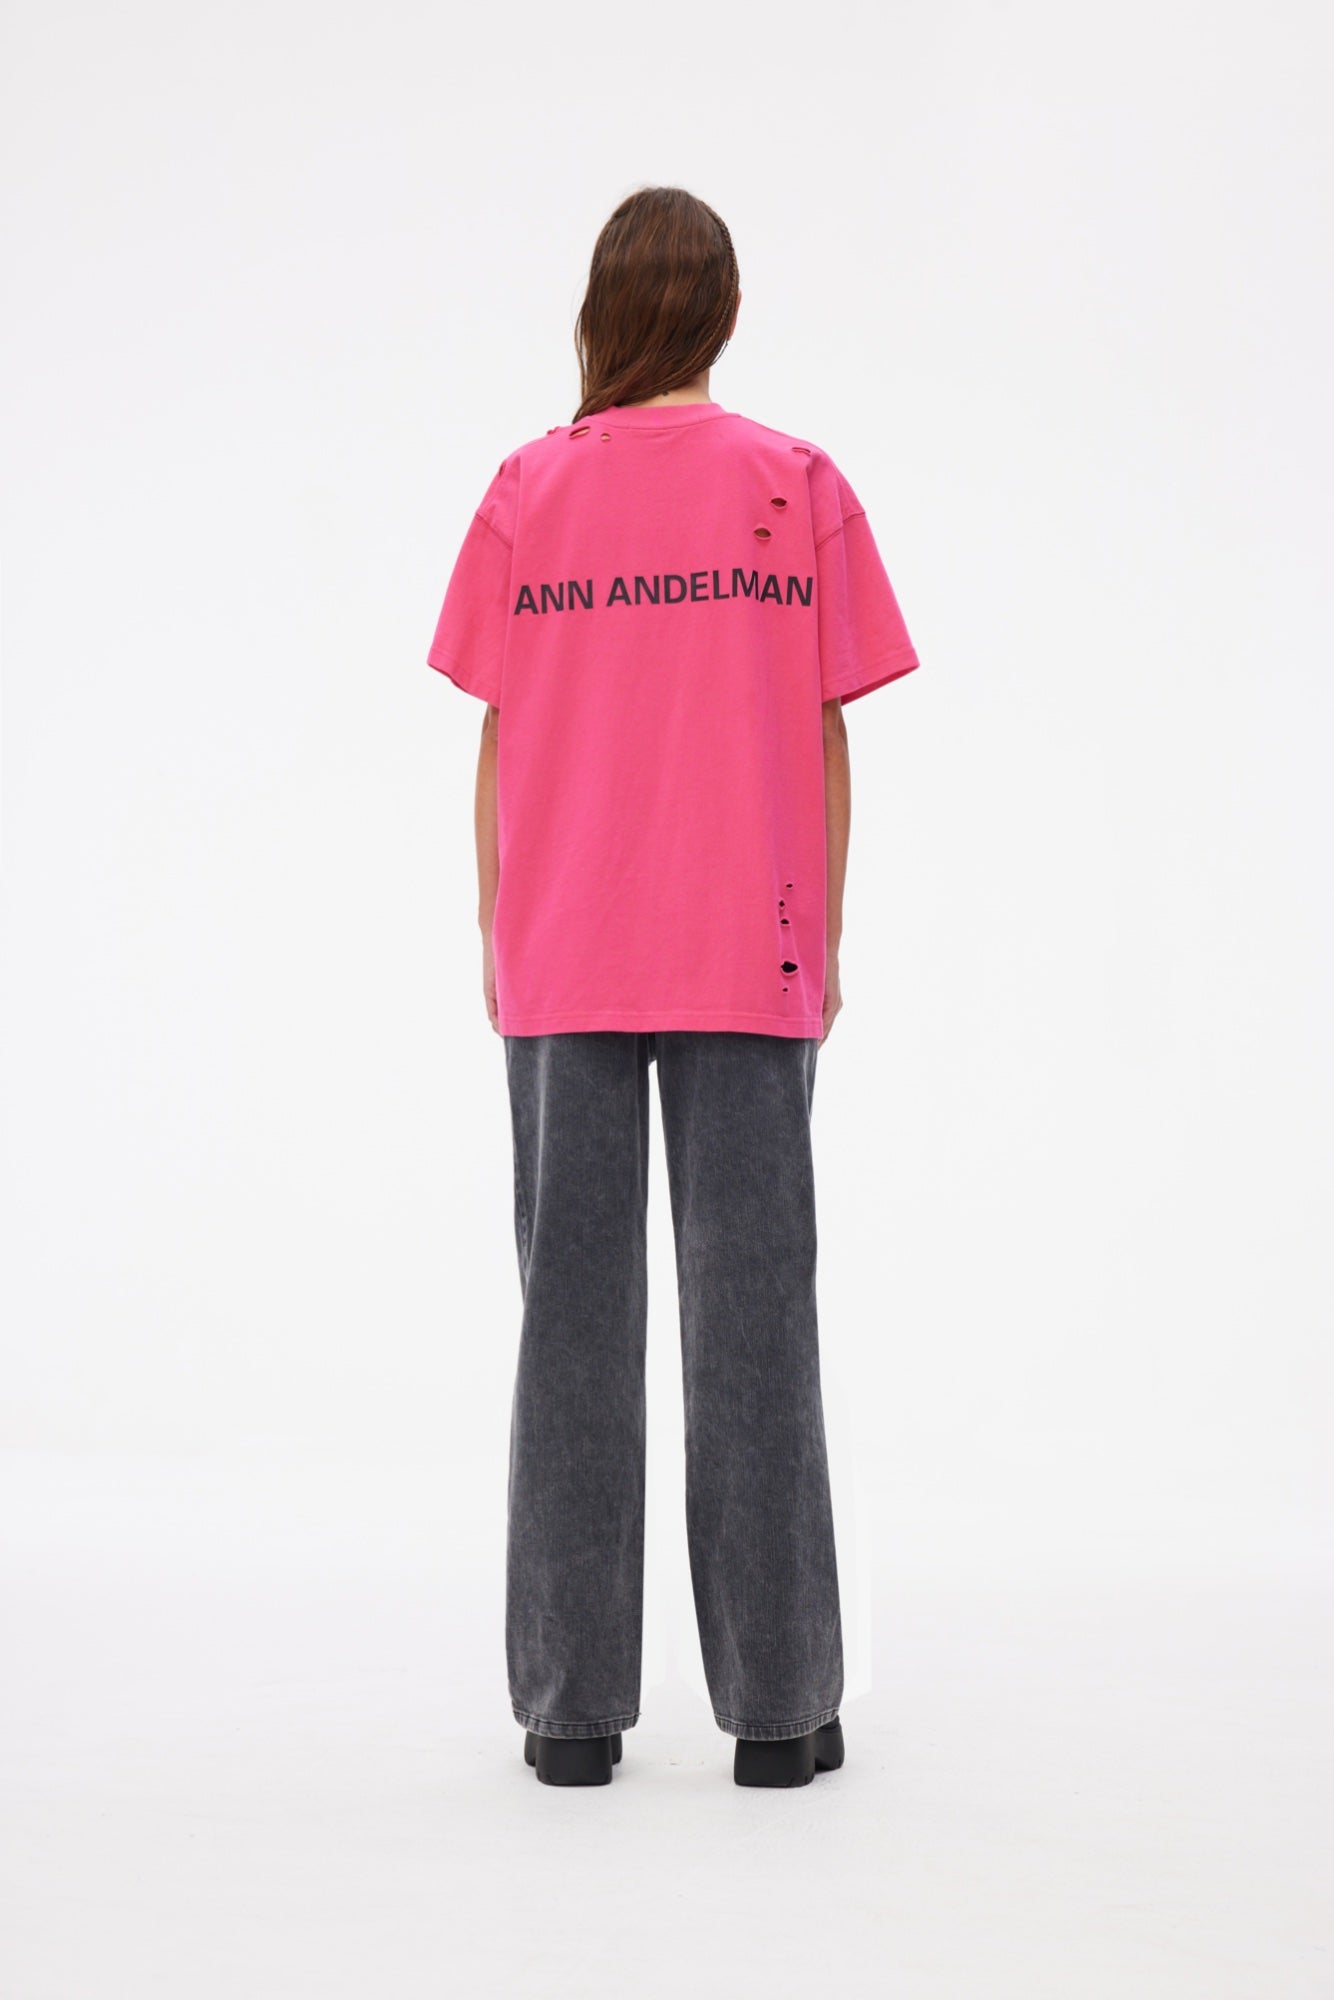 ANN ANDELMAN Limited Color T-shirt Rosered | MADA IN CHINA